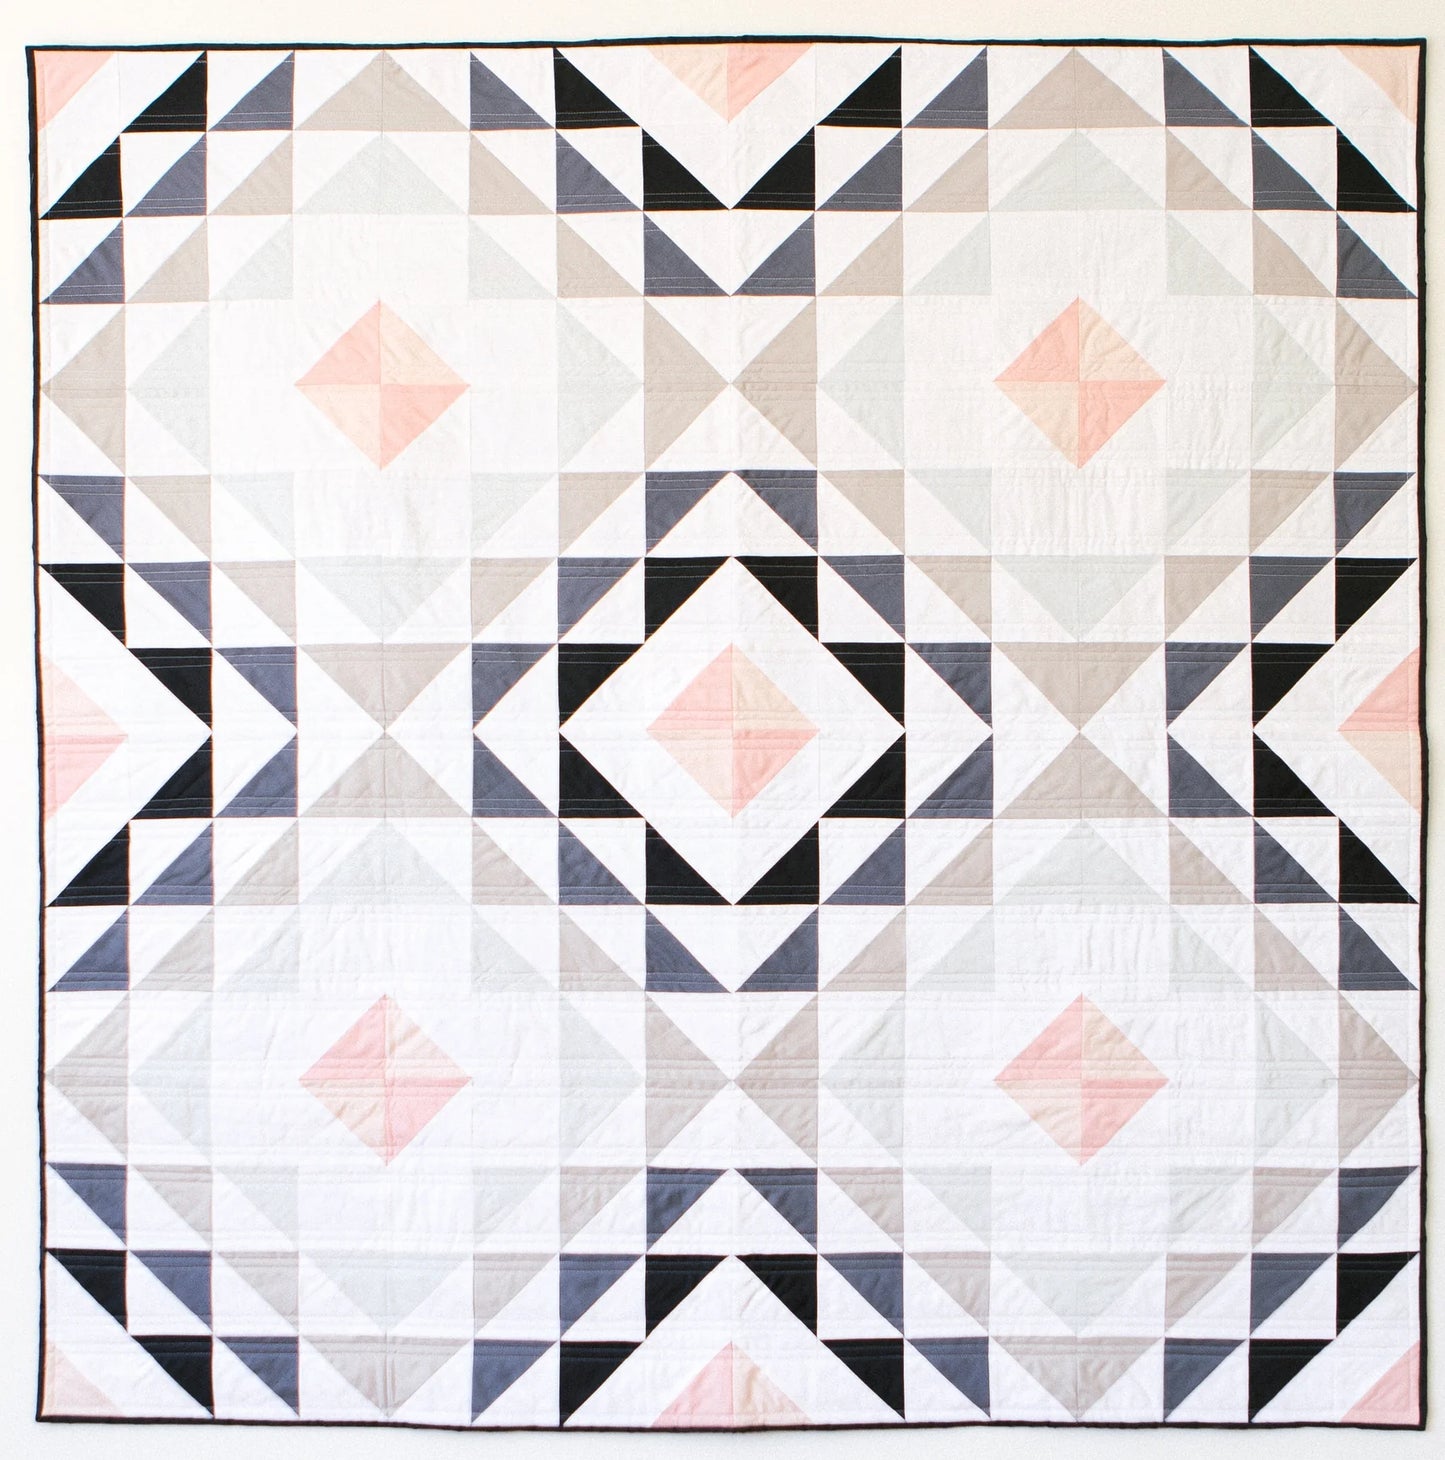 Diamond Ripples Quilt Pattern by Then Came June